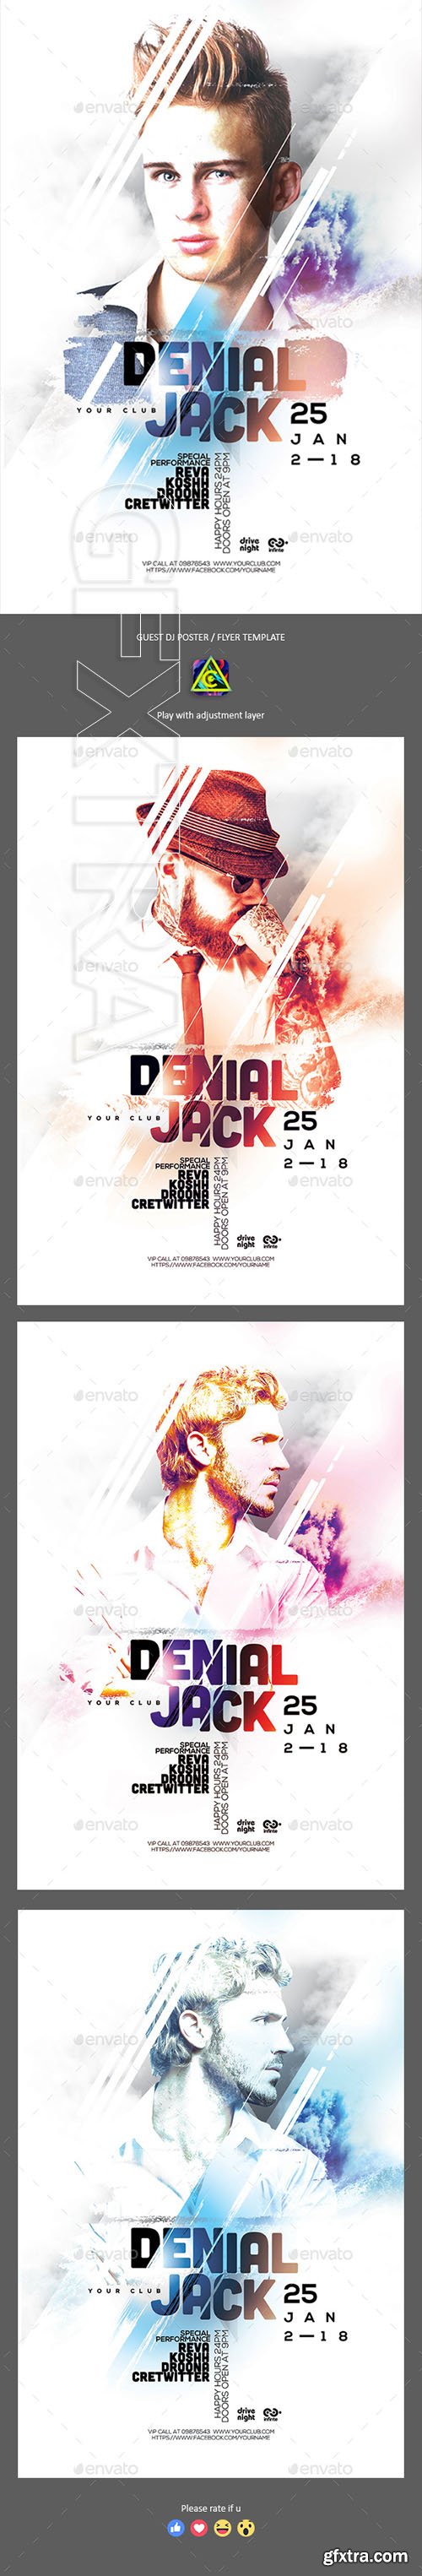 GraphicRiver - Guest Dj Poster Flyer Template 22385799